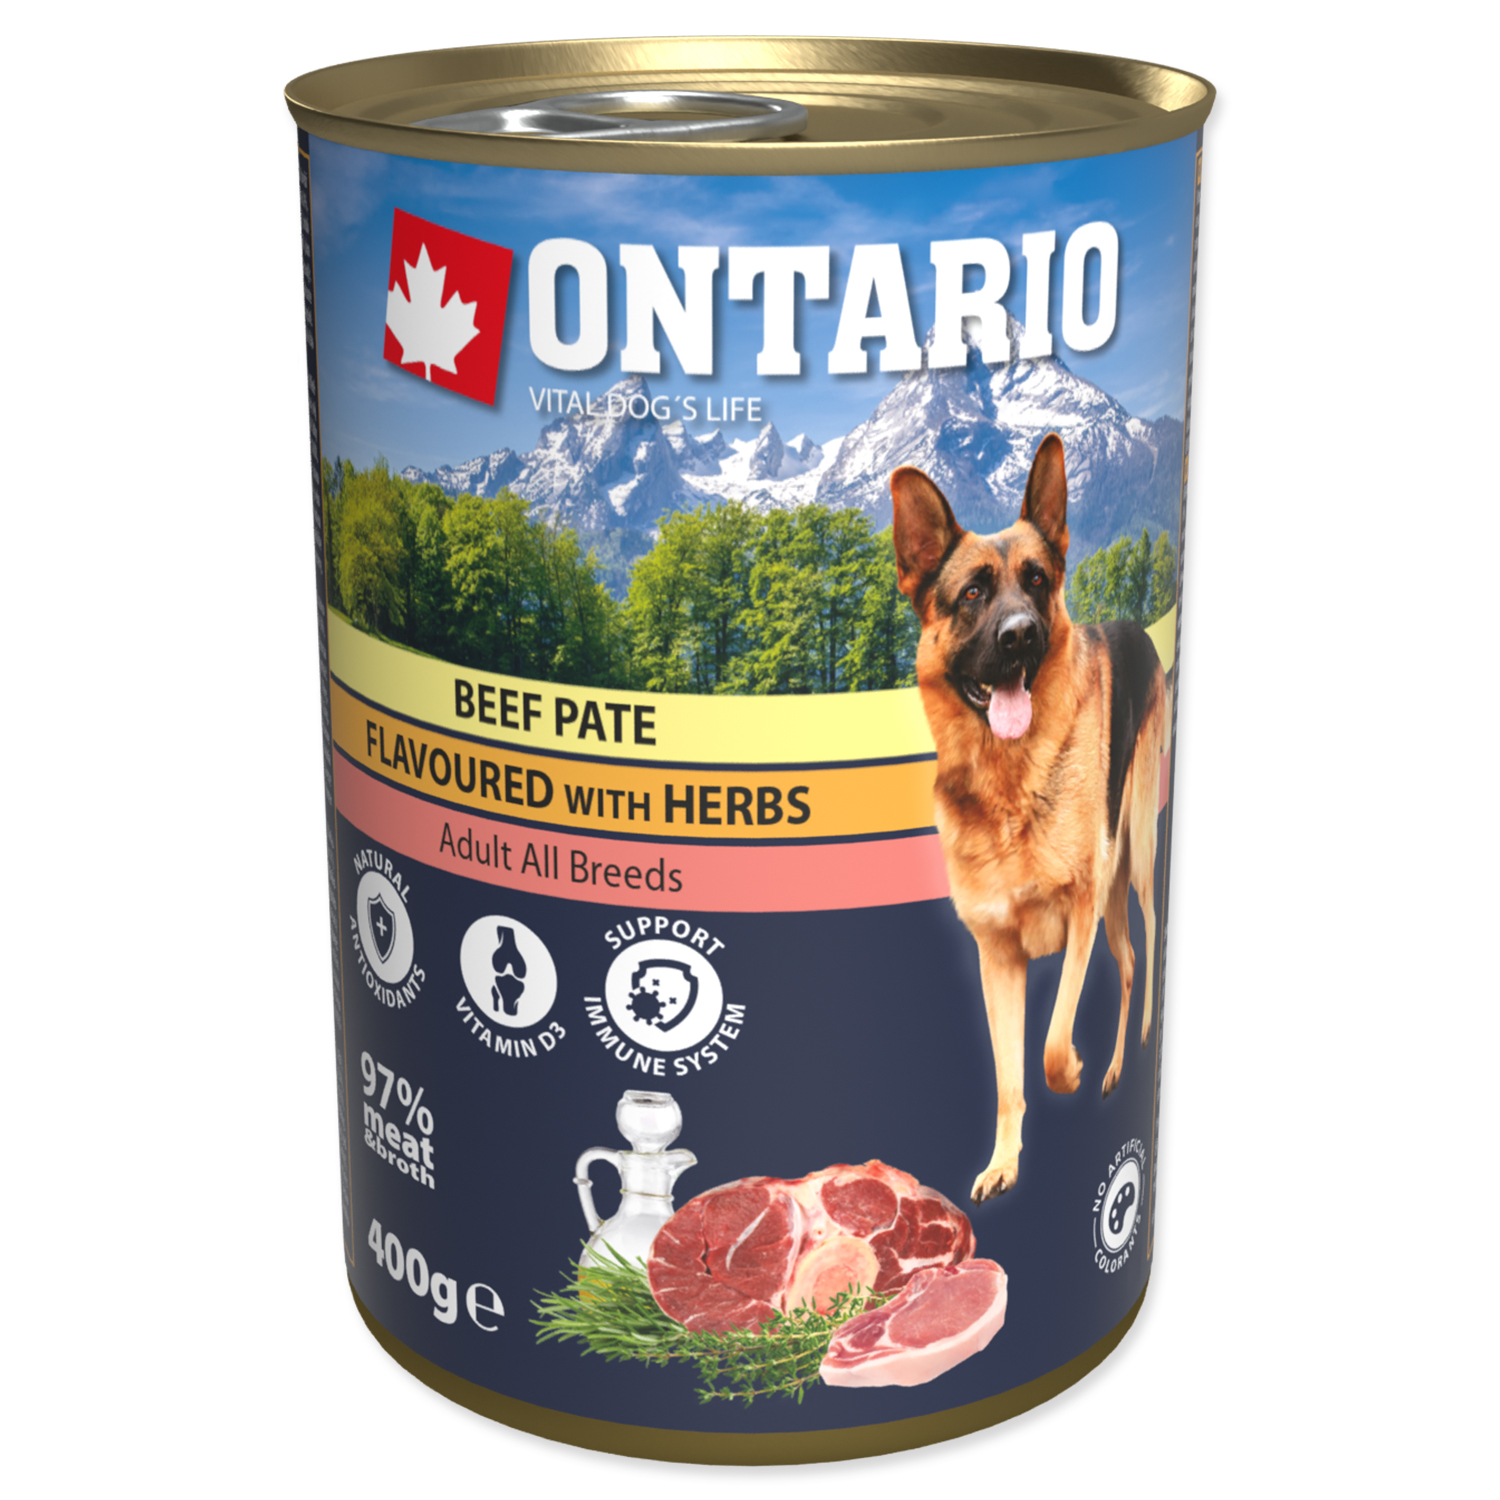 ONTARIO Dog Beef Pate Flavoured with Herbs 400 g